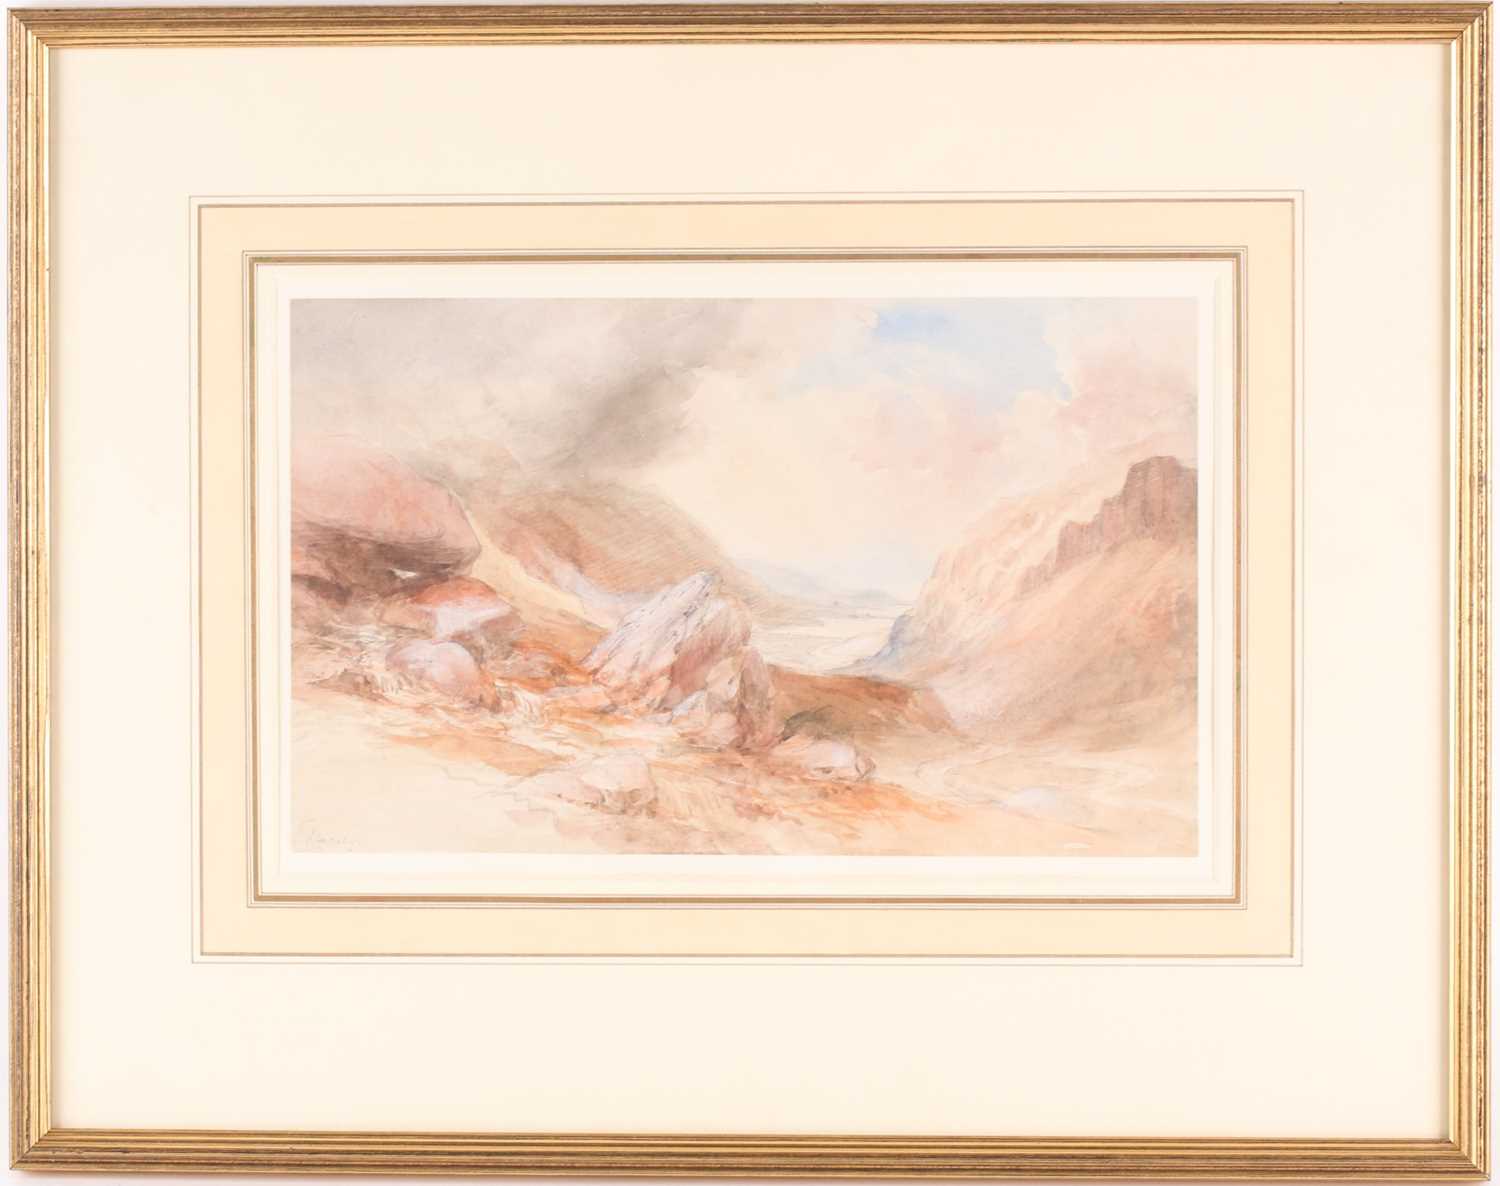 Thomas Lindsay (1793-1861) British, a coastal view from mountains, watercolour, signed to lower left